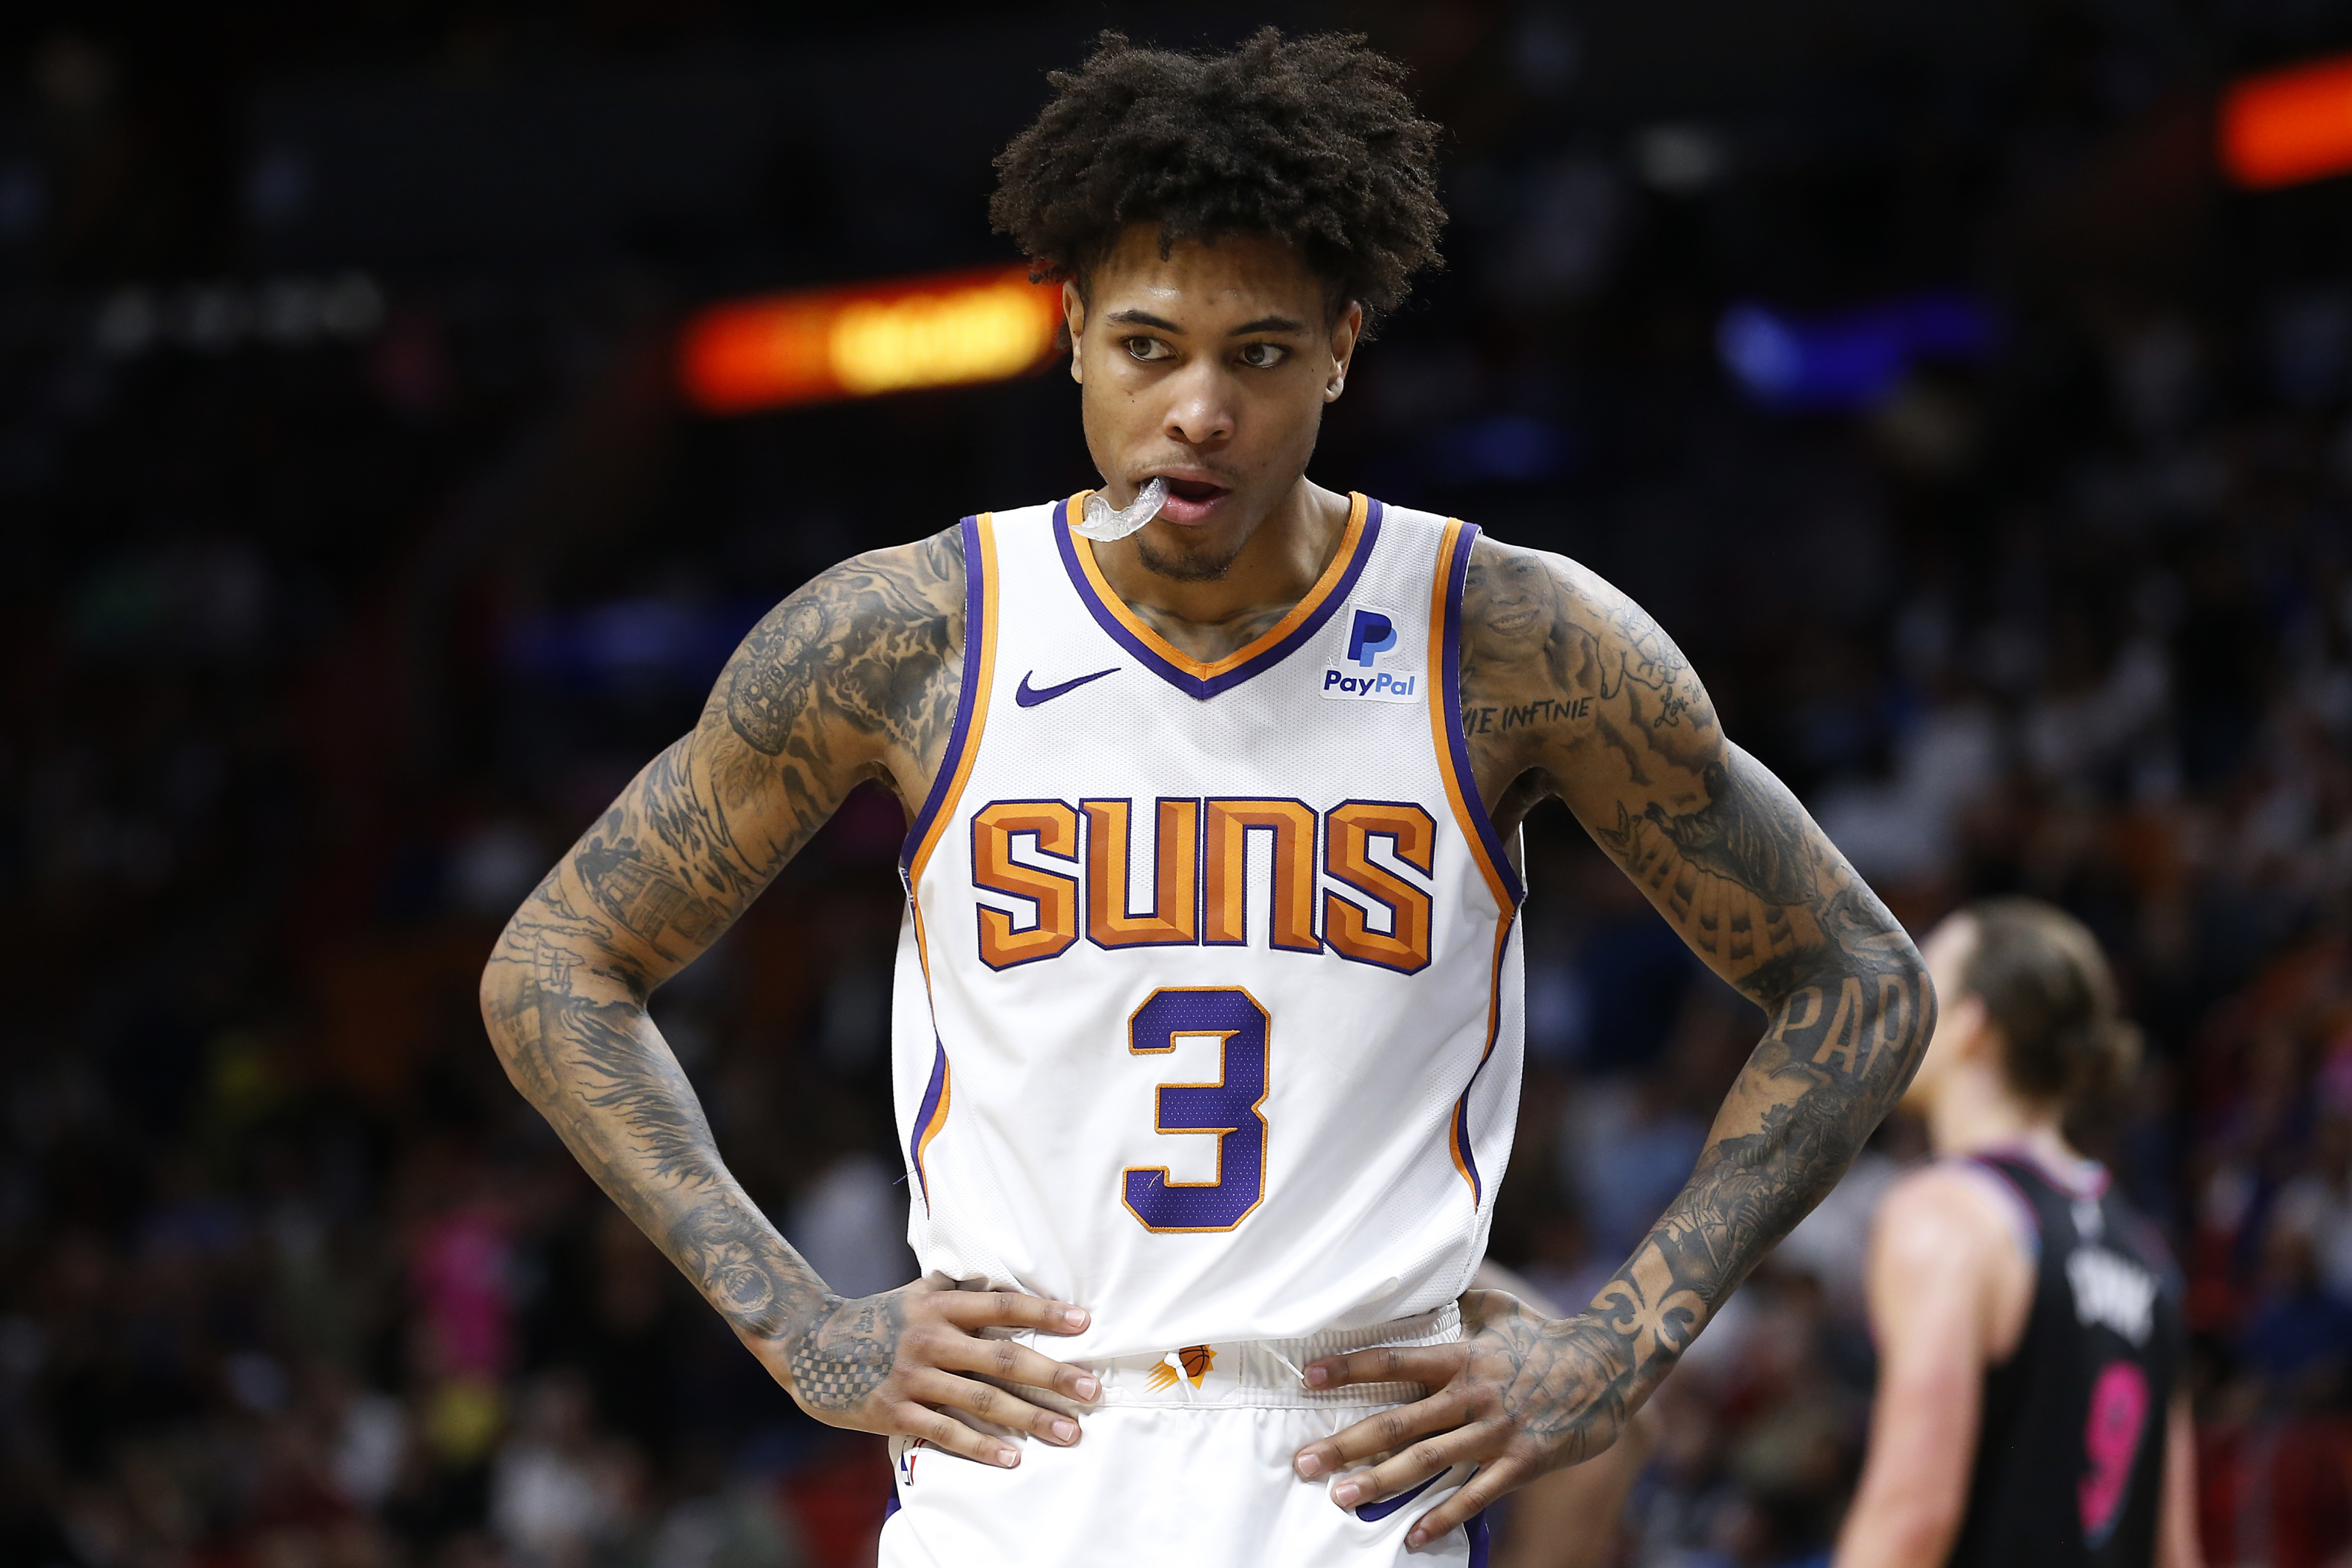 The Miami Heat are widely expected to sign Kelly Oubre Jr. if they